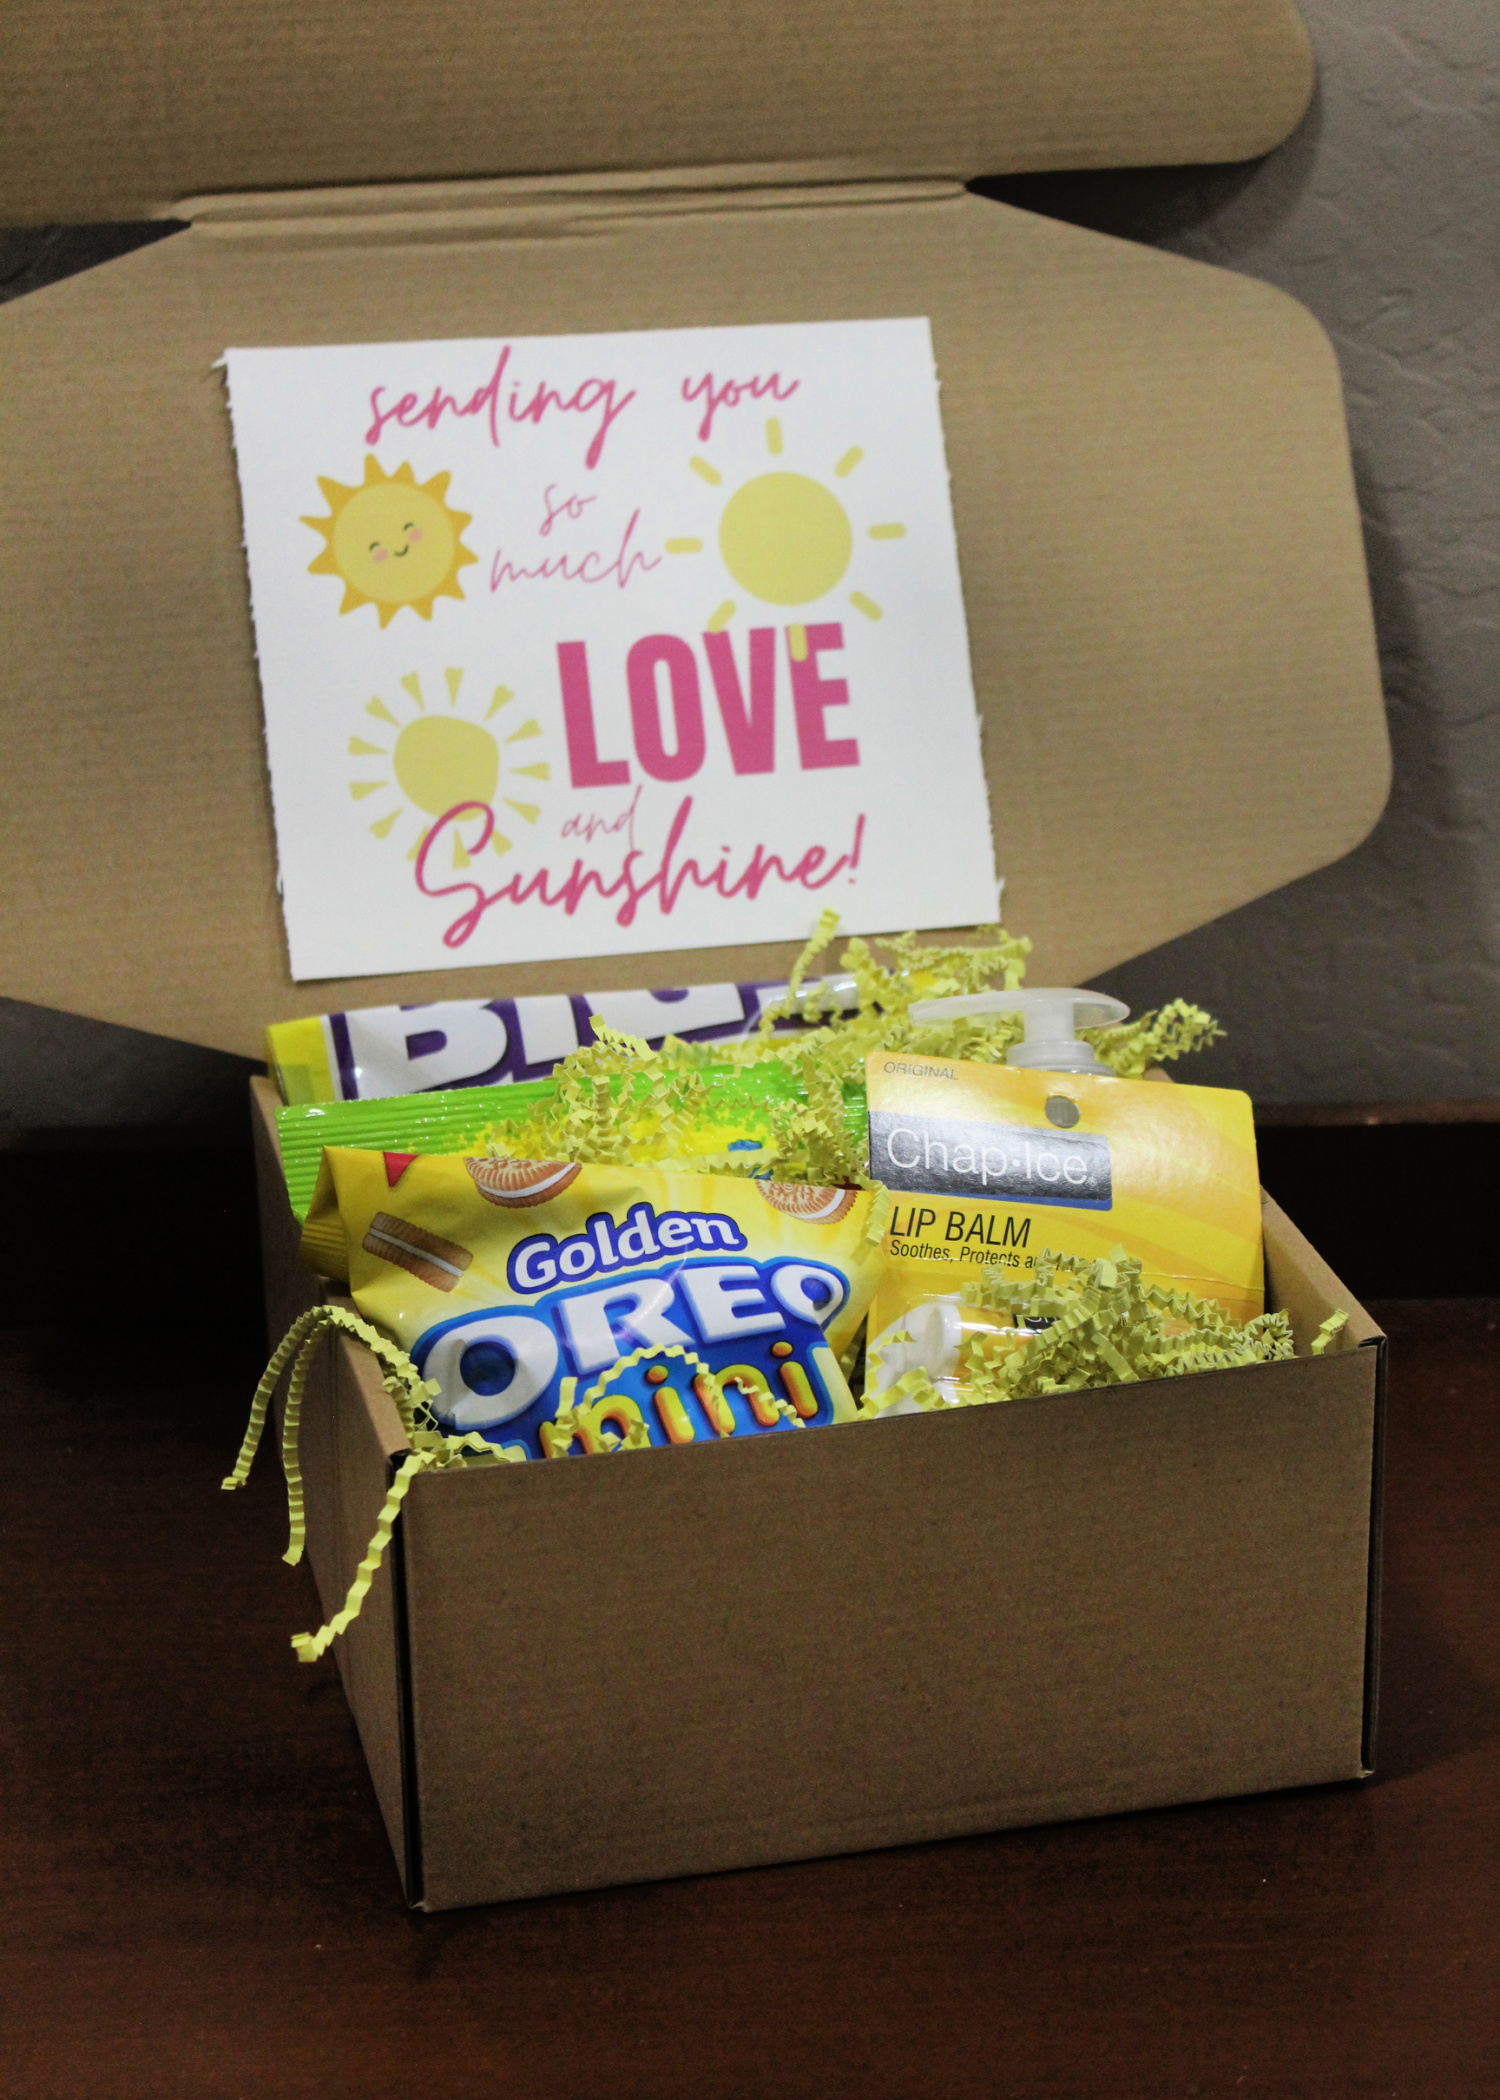  Brighten up someone's day with this Box of Sunshine Yellow Care Package - full of yellow-themed ideas from candy to beauty items, post-it notes and more!